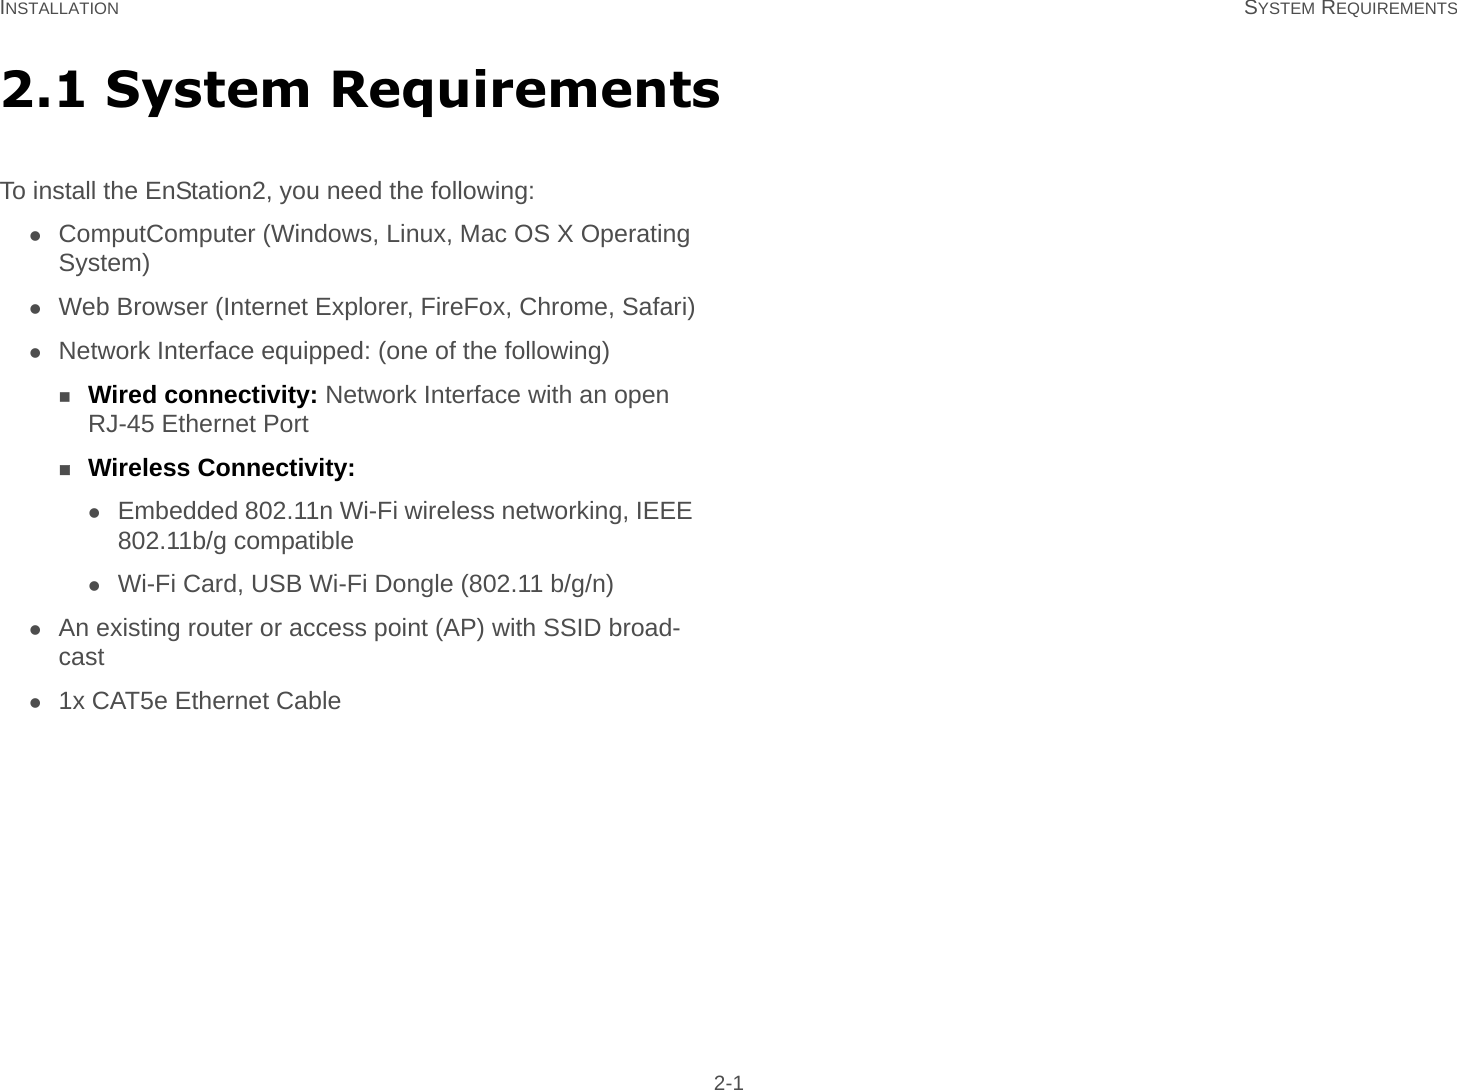 INSTALLATION SYSTEM REQUIREMENTS 2-12.1 System RequirementsTo install the EnStation2, you need the following:ComputComputer (Windows, Linux, Mac OS X Operating System)Web Browser (Internet Explorer, FireFox, Chrome, Safari)Network Interface equipped: (one of the following)Wired connectivity: Network Interface with an open RJ-45 Ethernet PortWireless Connectivity:Embedded 802.11n Wi-Fi wireless networking, IEEE 802.11b/g compatibleWi-Fi Card, USB Wi-Fi Dongle (802.11 b/g/n)An existing router or access point (AP) with SSID broad-cast1x CAT5e Ethernet Cable